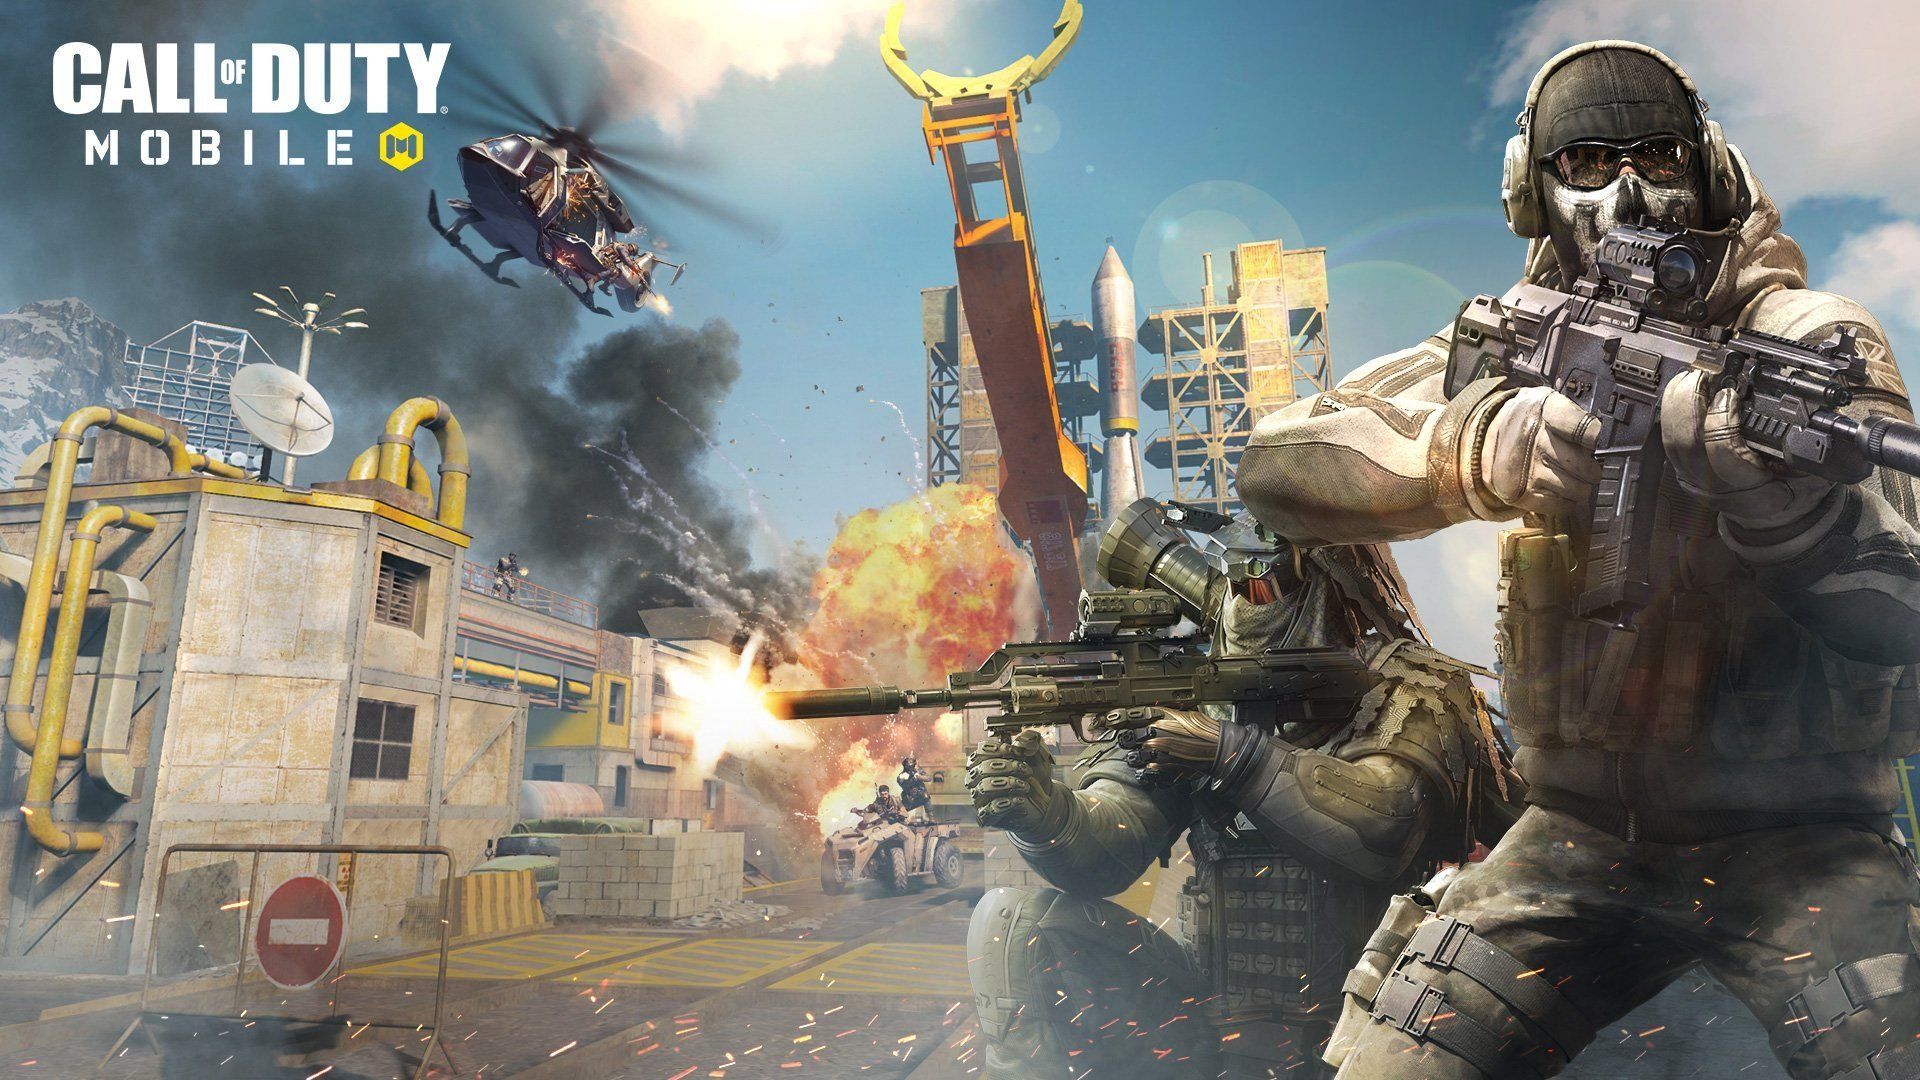 Call of Duty: Mobile has More than 100 Million Downloads! Details + HD Wallpaper